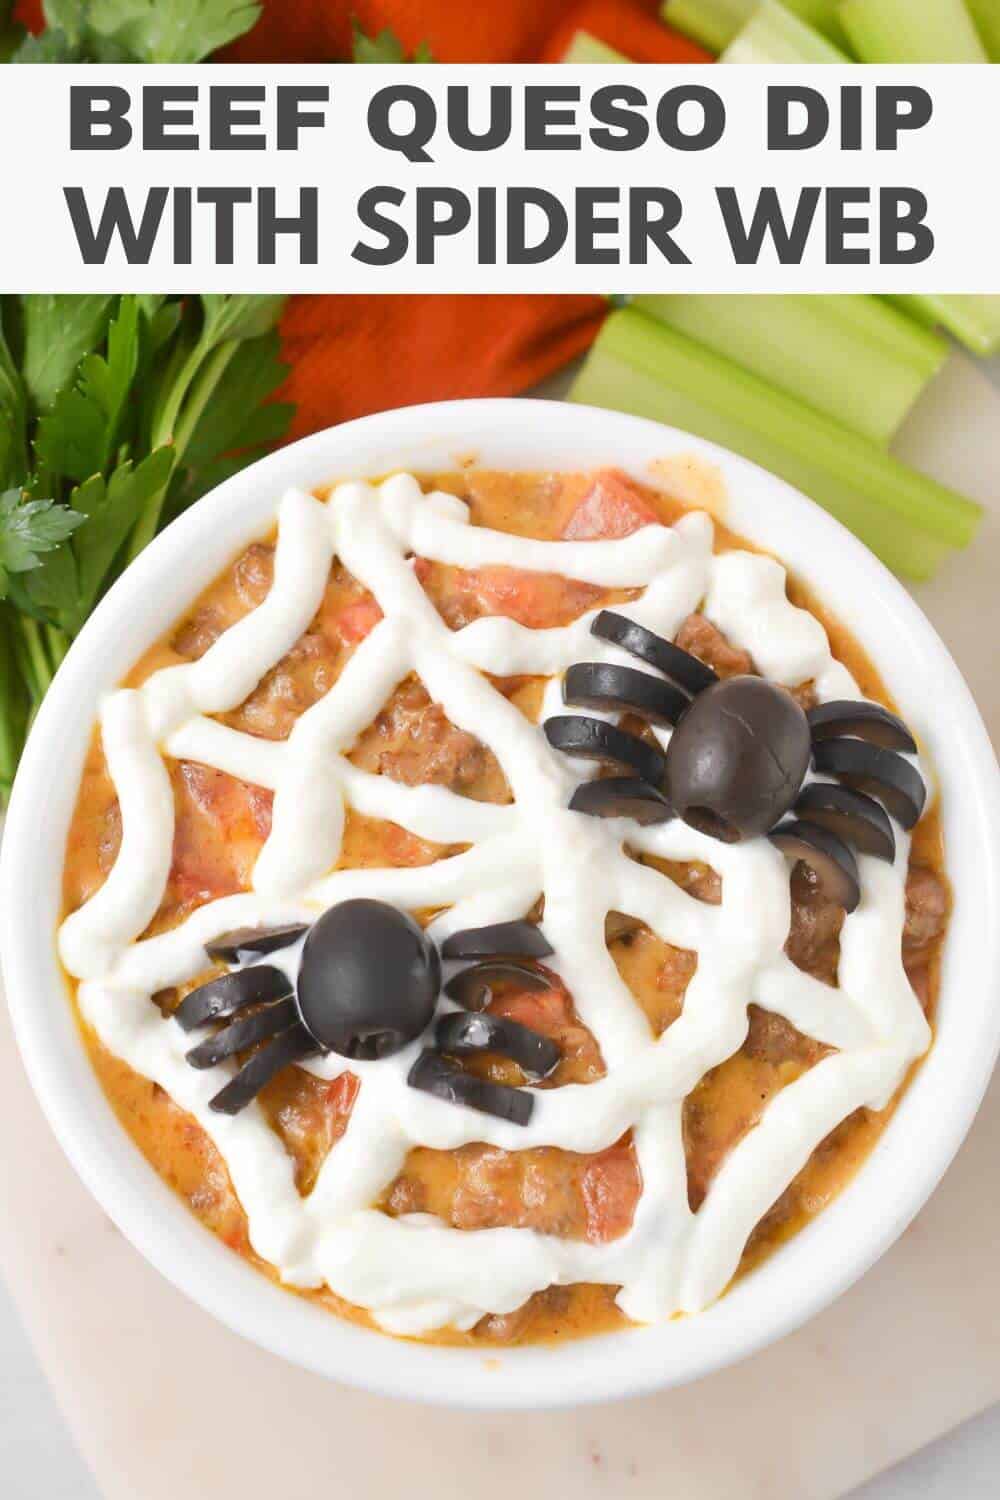 Beef queso dip with a spooky spider web twist.